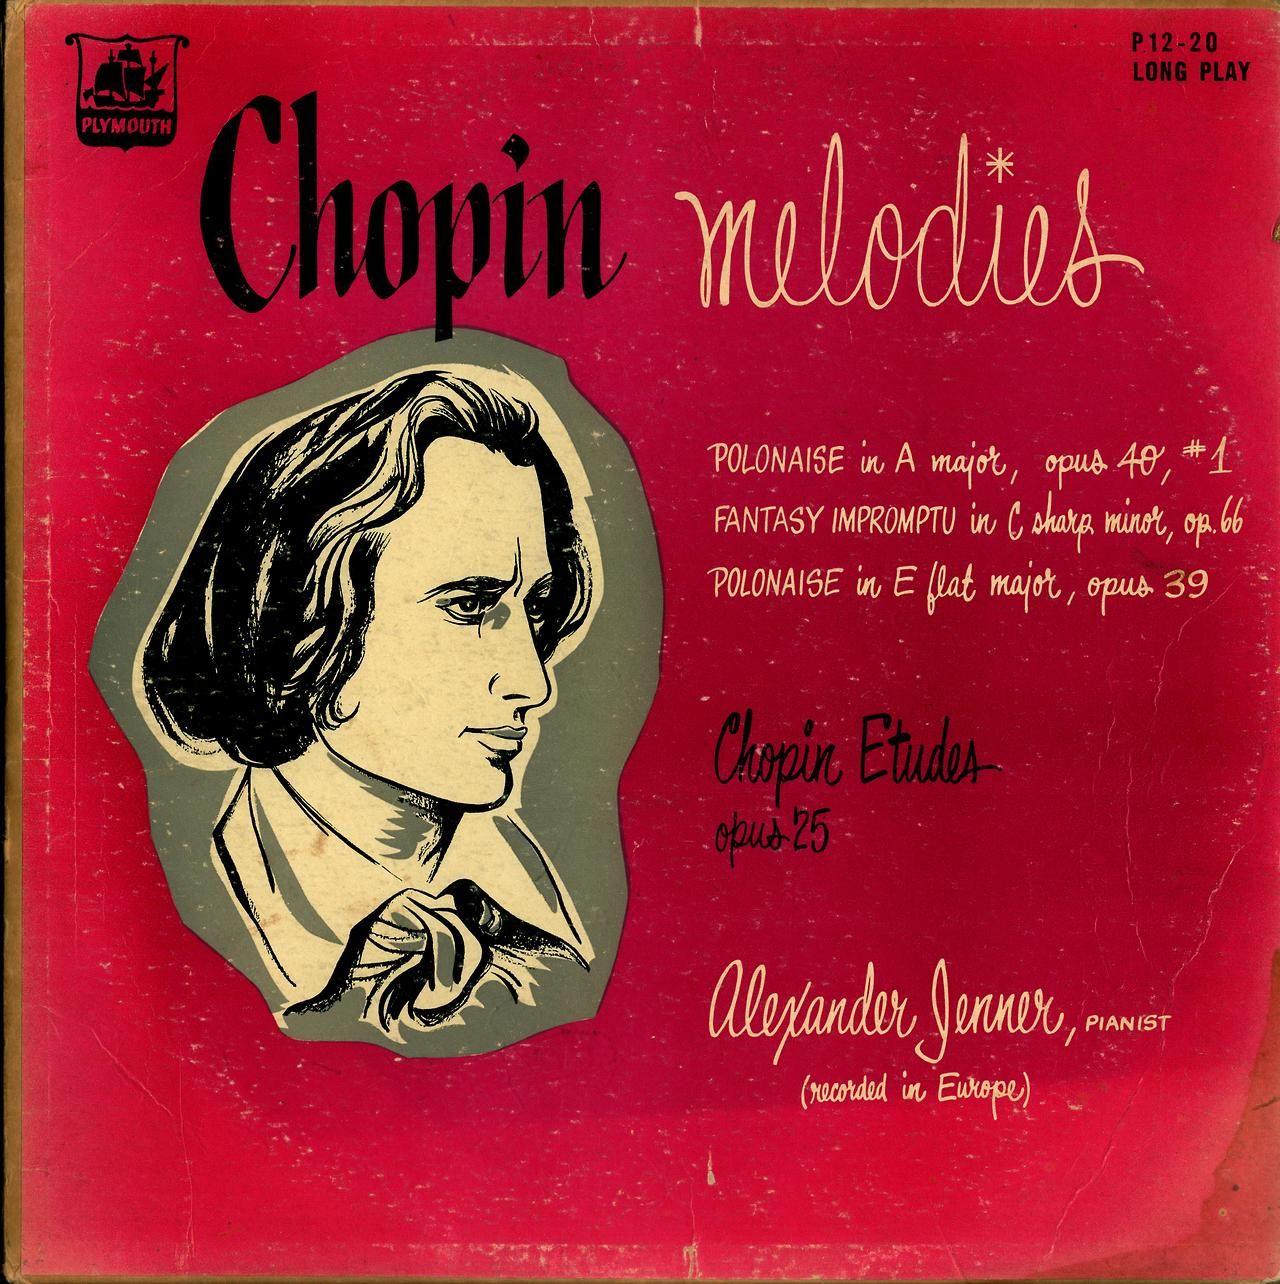 Chopin Melodies; Alexander Jenner, Piano Plymouth Records P12-20 (year unknown) This is actually a really shitty record, but it’s pretty.